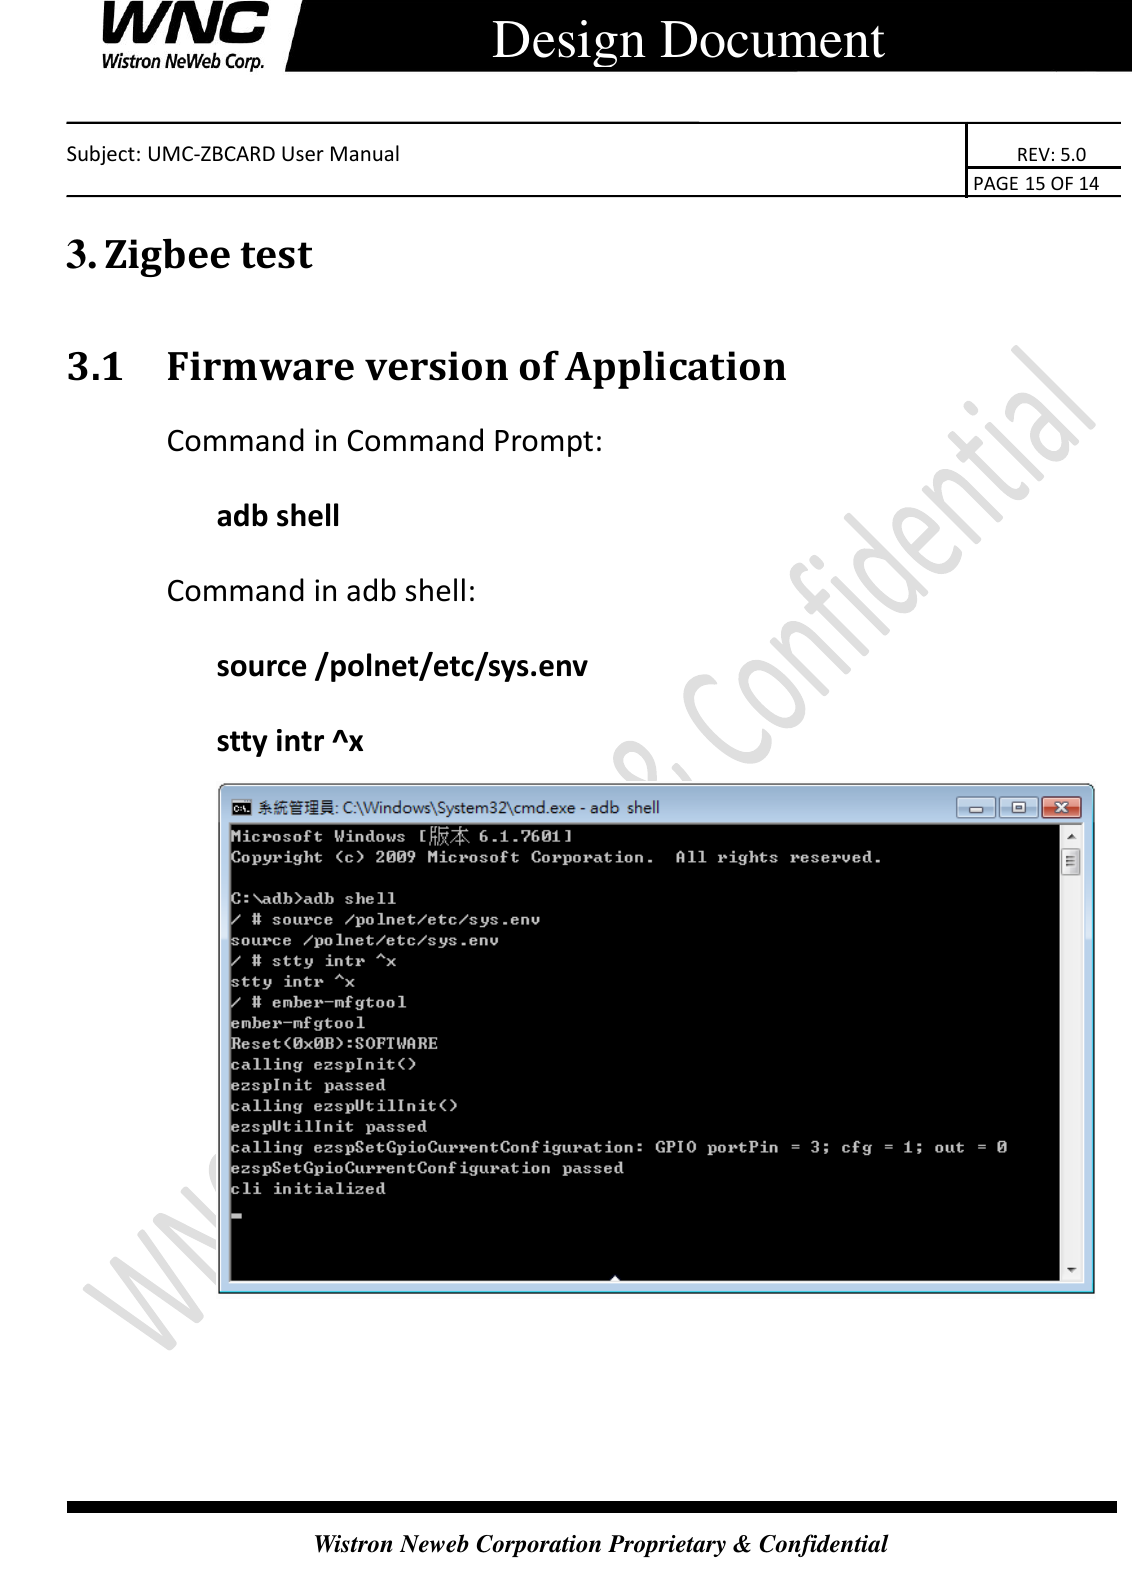    Subject: UMC-ZBCARD User Manual                                                                      REV: 5.0                                                                                        PAGE 15 OF 14  Wistron Neweb Corporation Proprietary &amp; Confidential      Design Document 3. Zigbee test 3.1 Firmware version of Application Command in Command Prompt: adb shell Command in adb shell: source /polnet/etc/sys.env stty intr ^x  